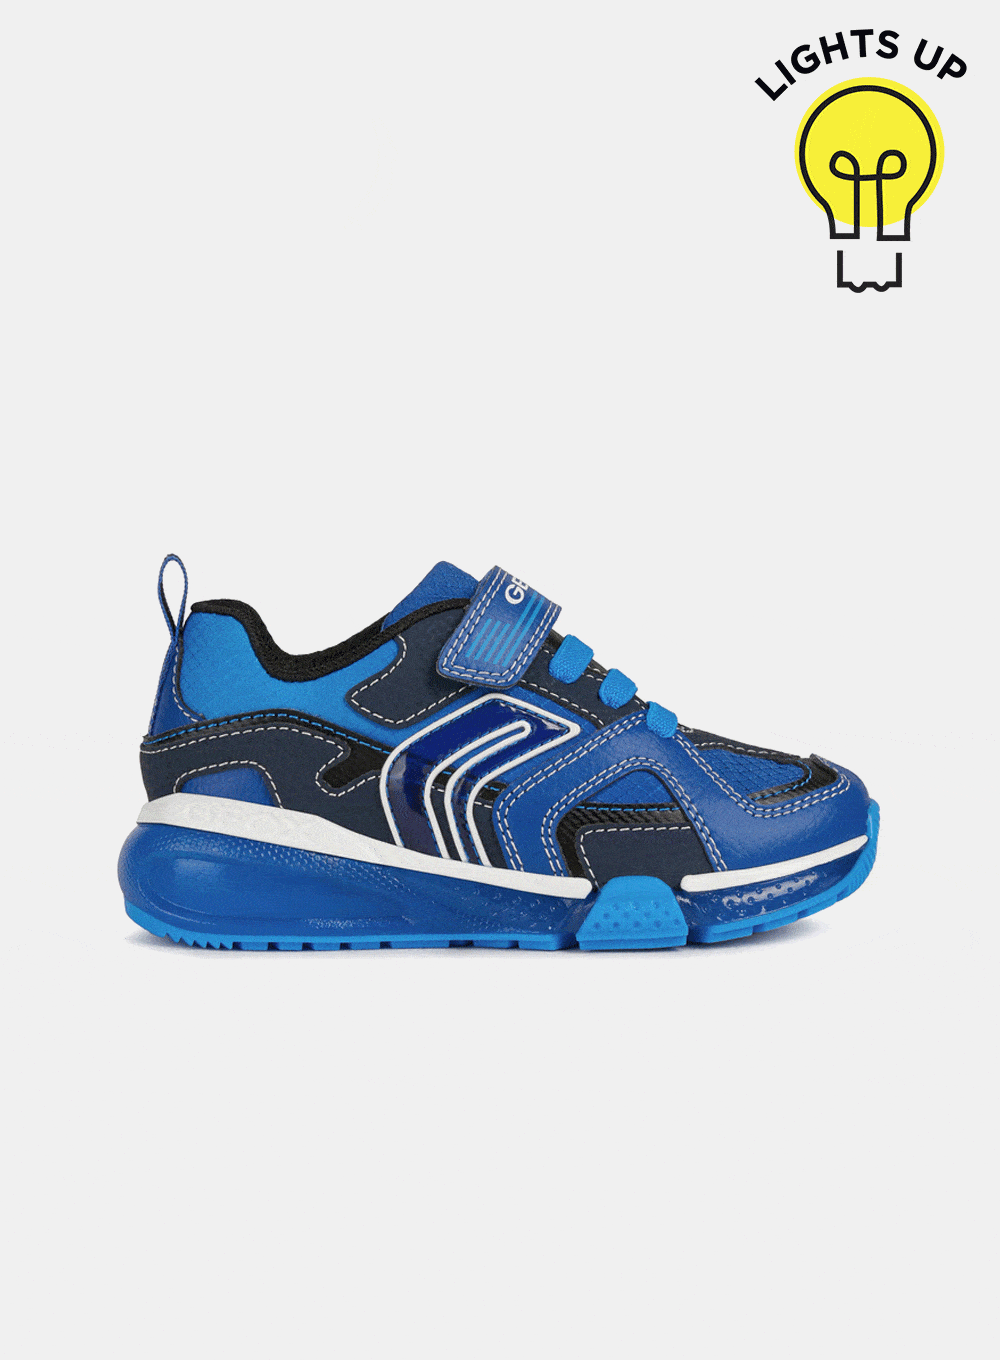 Geox Light-Up Trainers in Navy/Royal | Trotters